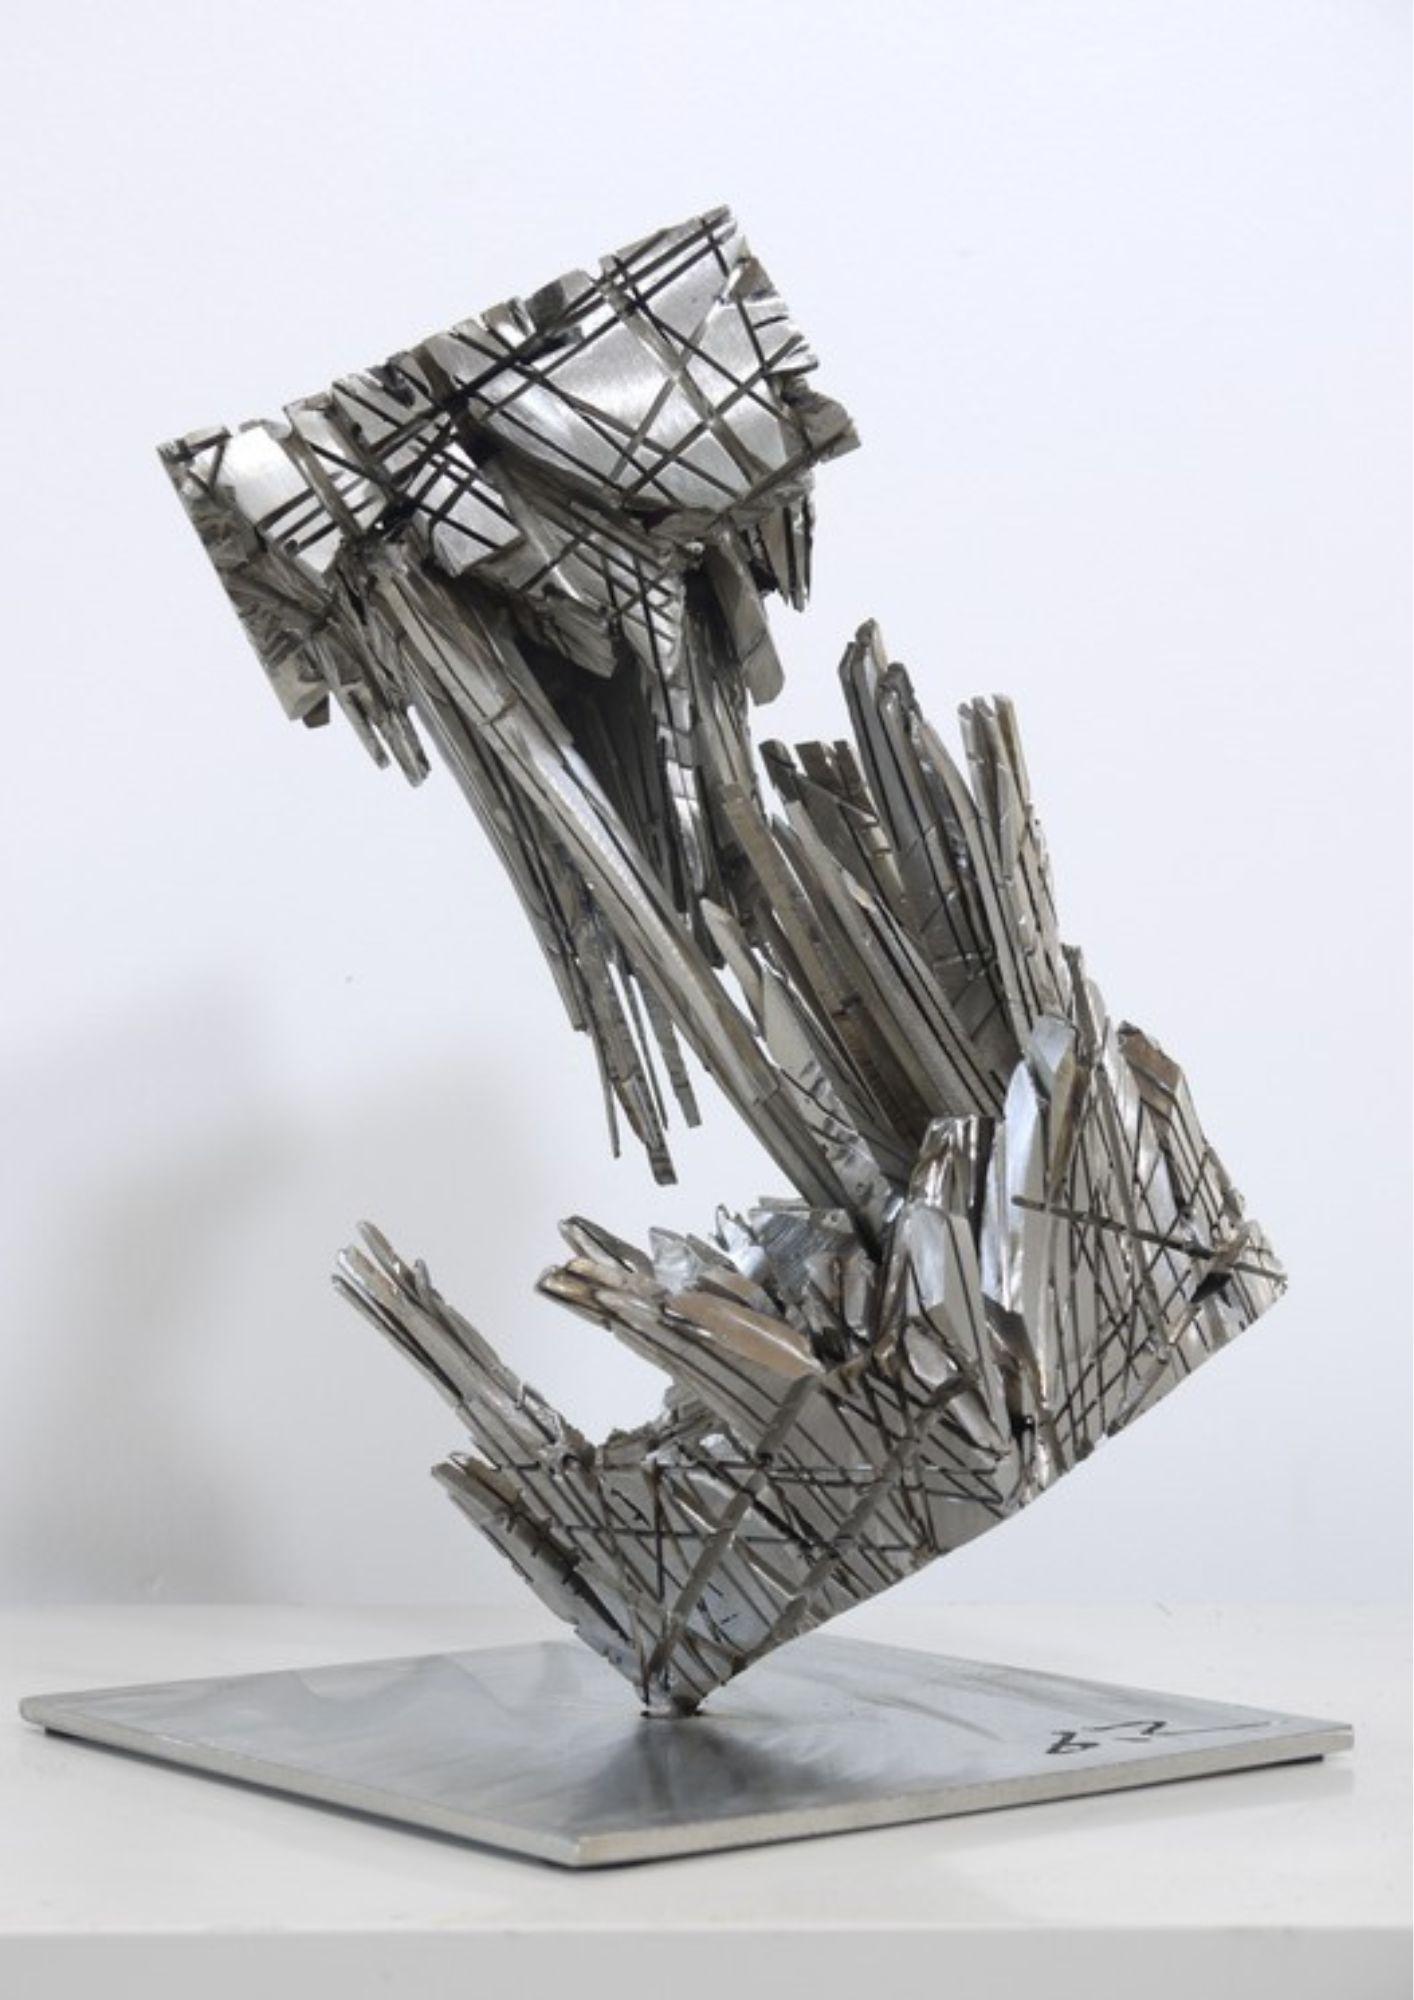 
The Spyrite 5 sculpture is an artistic work inspired by transformation and connection. Originally, this piece is a cube, but it reinvents itself by stretching and spreading out to create a dynamic and striking vision.

The cube divides into two